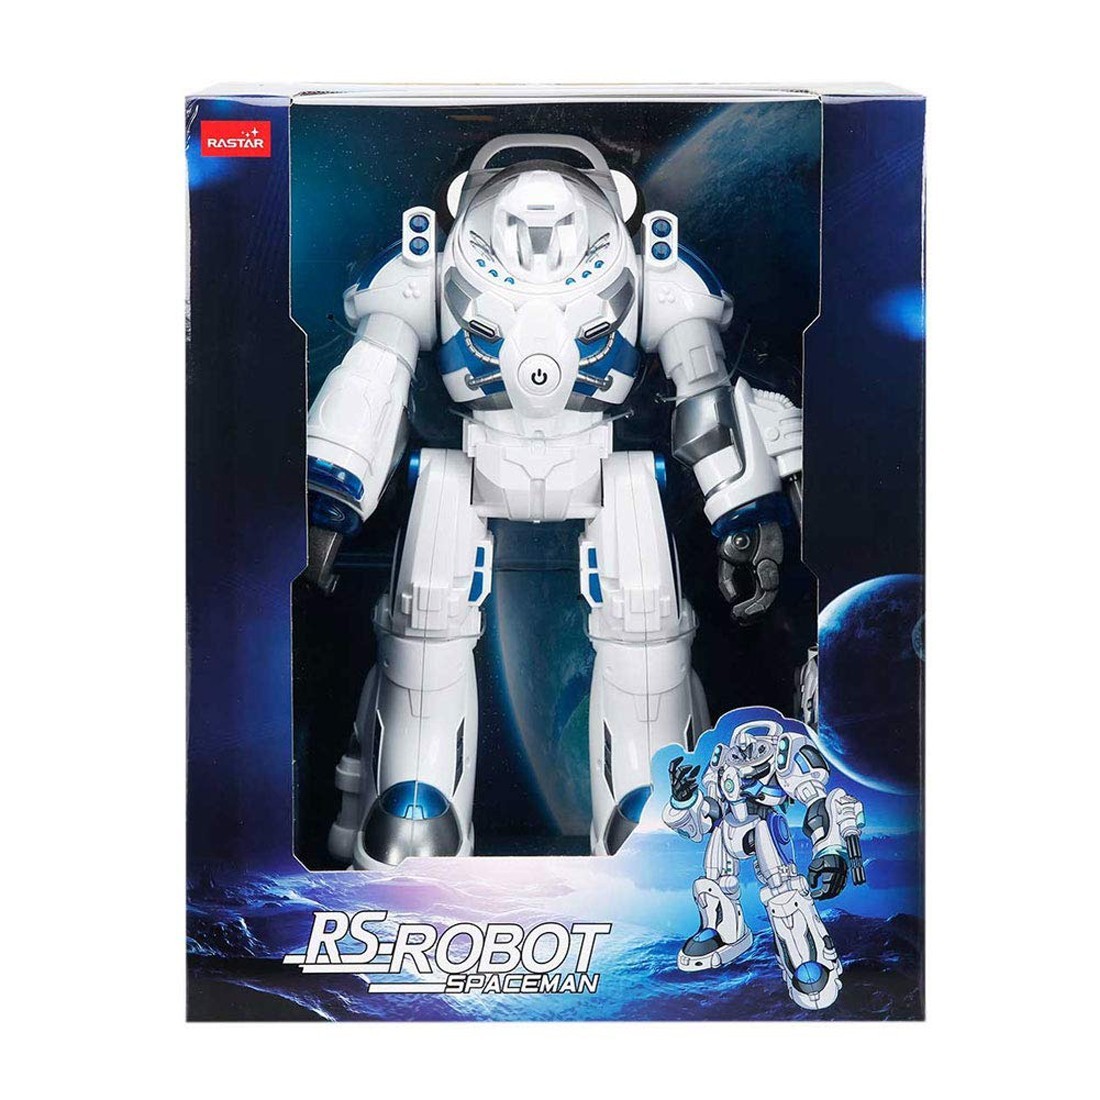 Shop Rastar Rs Robot - Spaceman (Black, White) - RASTAR, delivered to your  home | TheOutfit